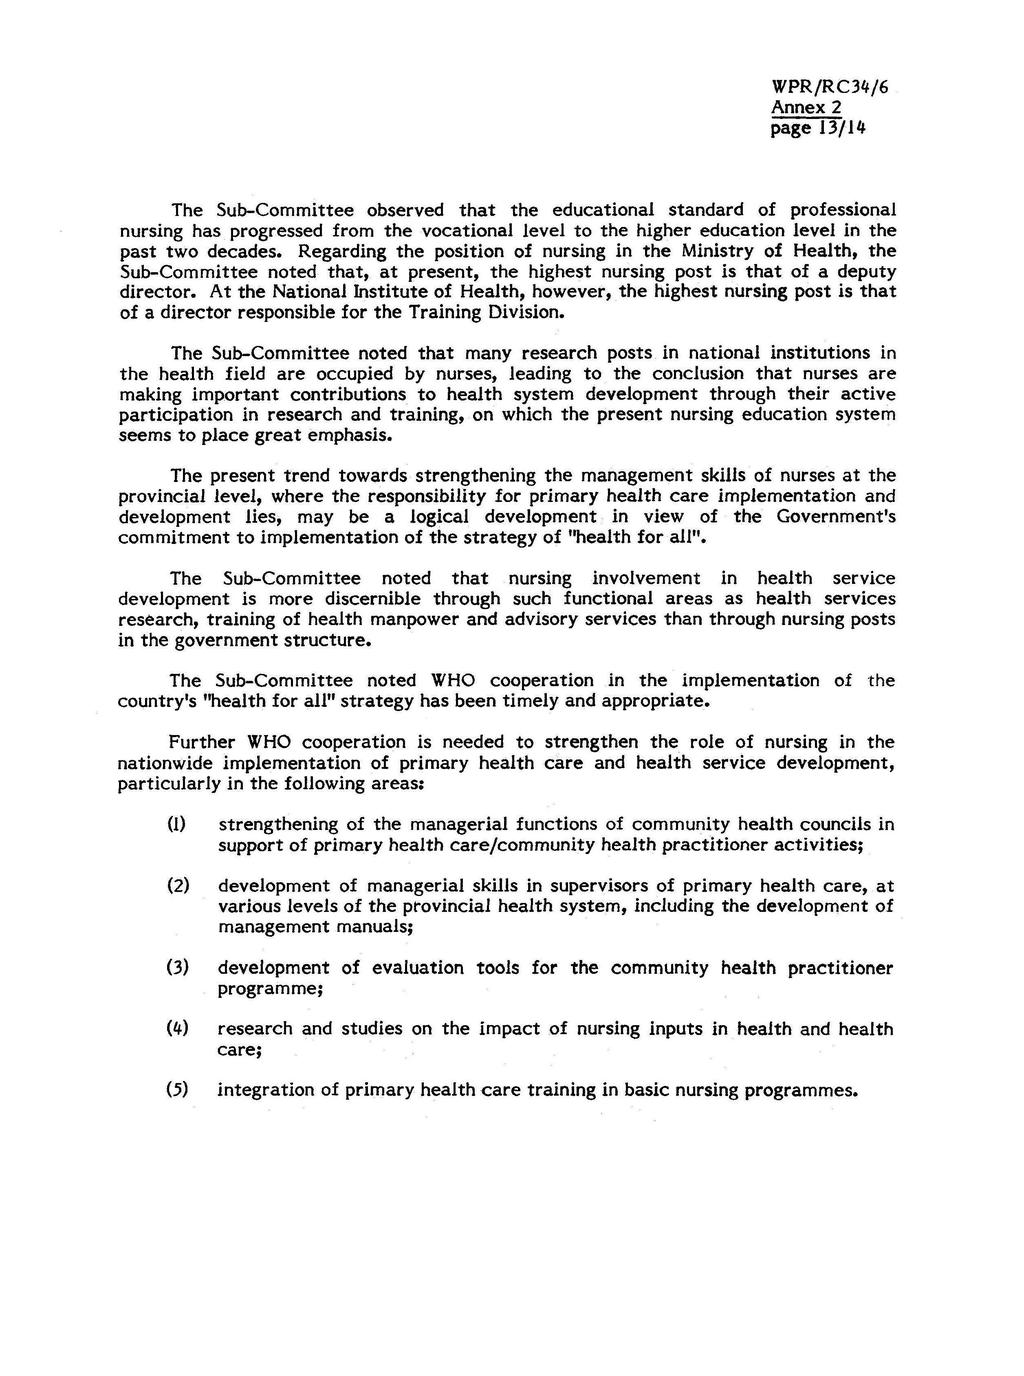 Annex 2 page 13/14 The Sub-Committee observed that the educational standard of professional nursing has progressed from the vocational level to the higher education level in the past two decades.